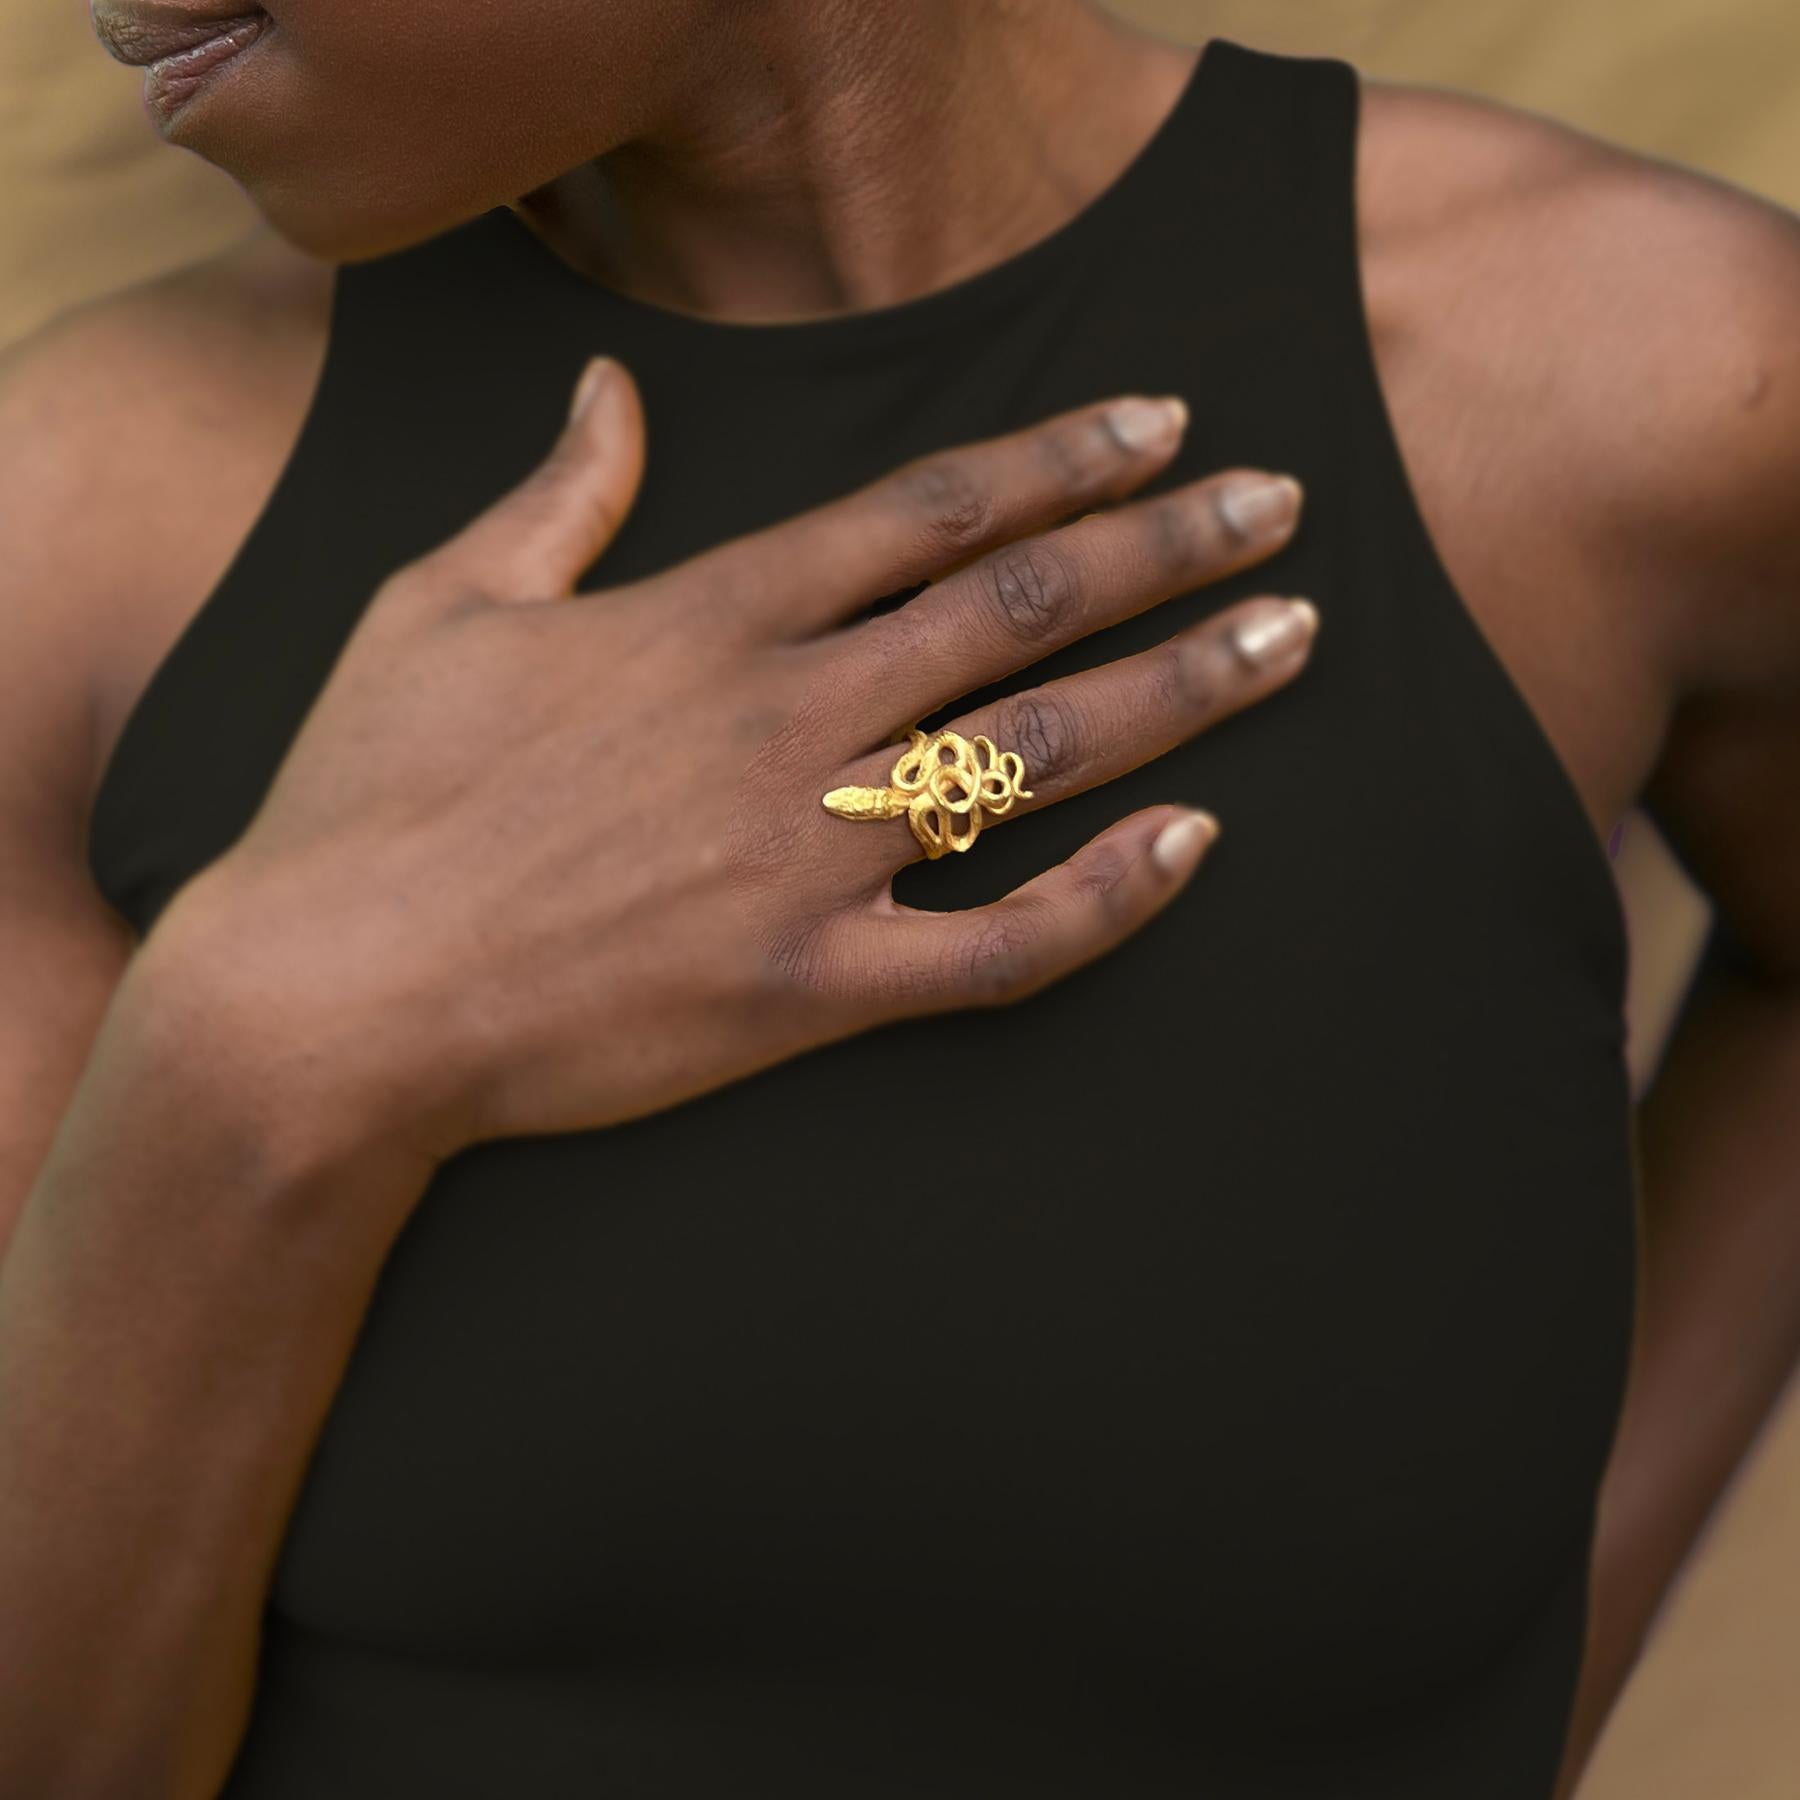 This ring is available in a size 7 and a size 8.5. Please specify your preferred size in the order notes at checkout.

Step into the world of exquisite craftsmanship with the Serpentine Ring in 18k Gold Vermeil. Each piece is meticulously crafted in